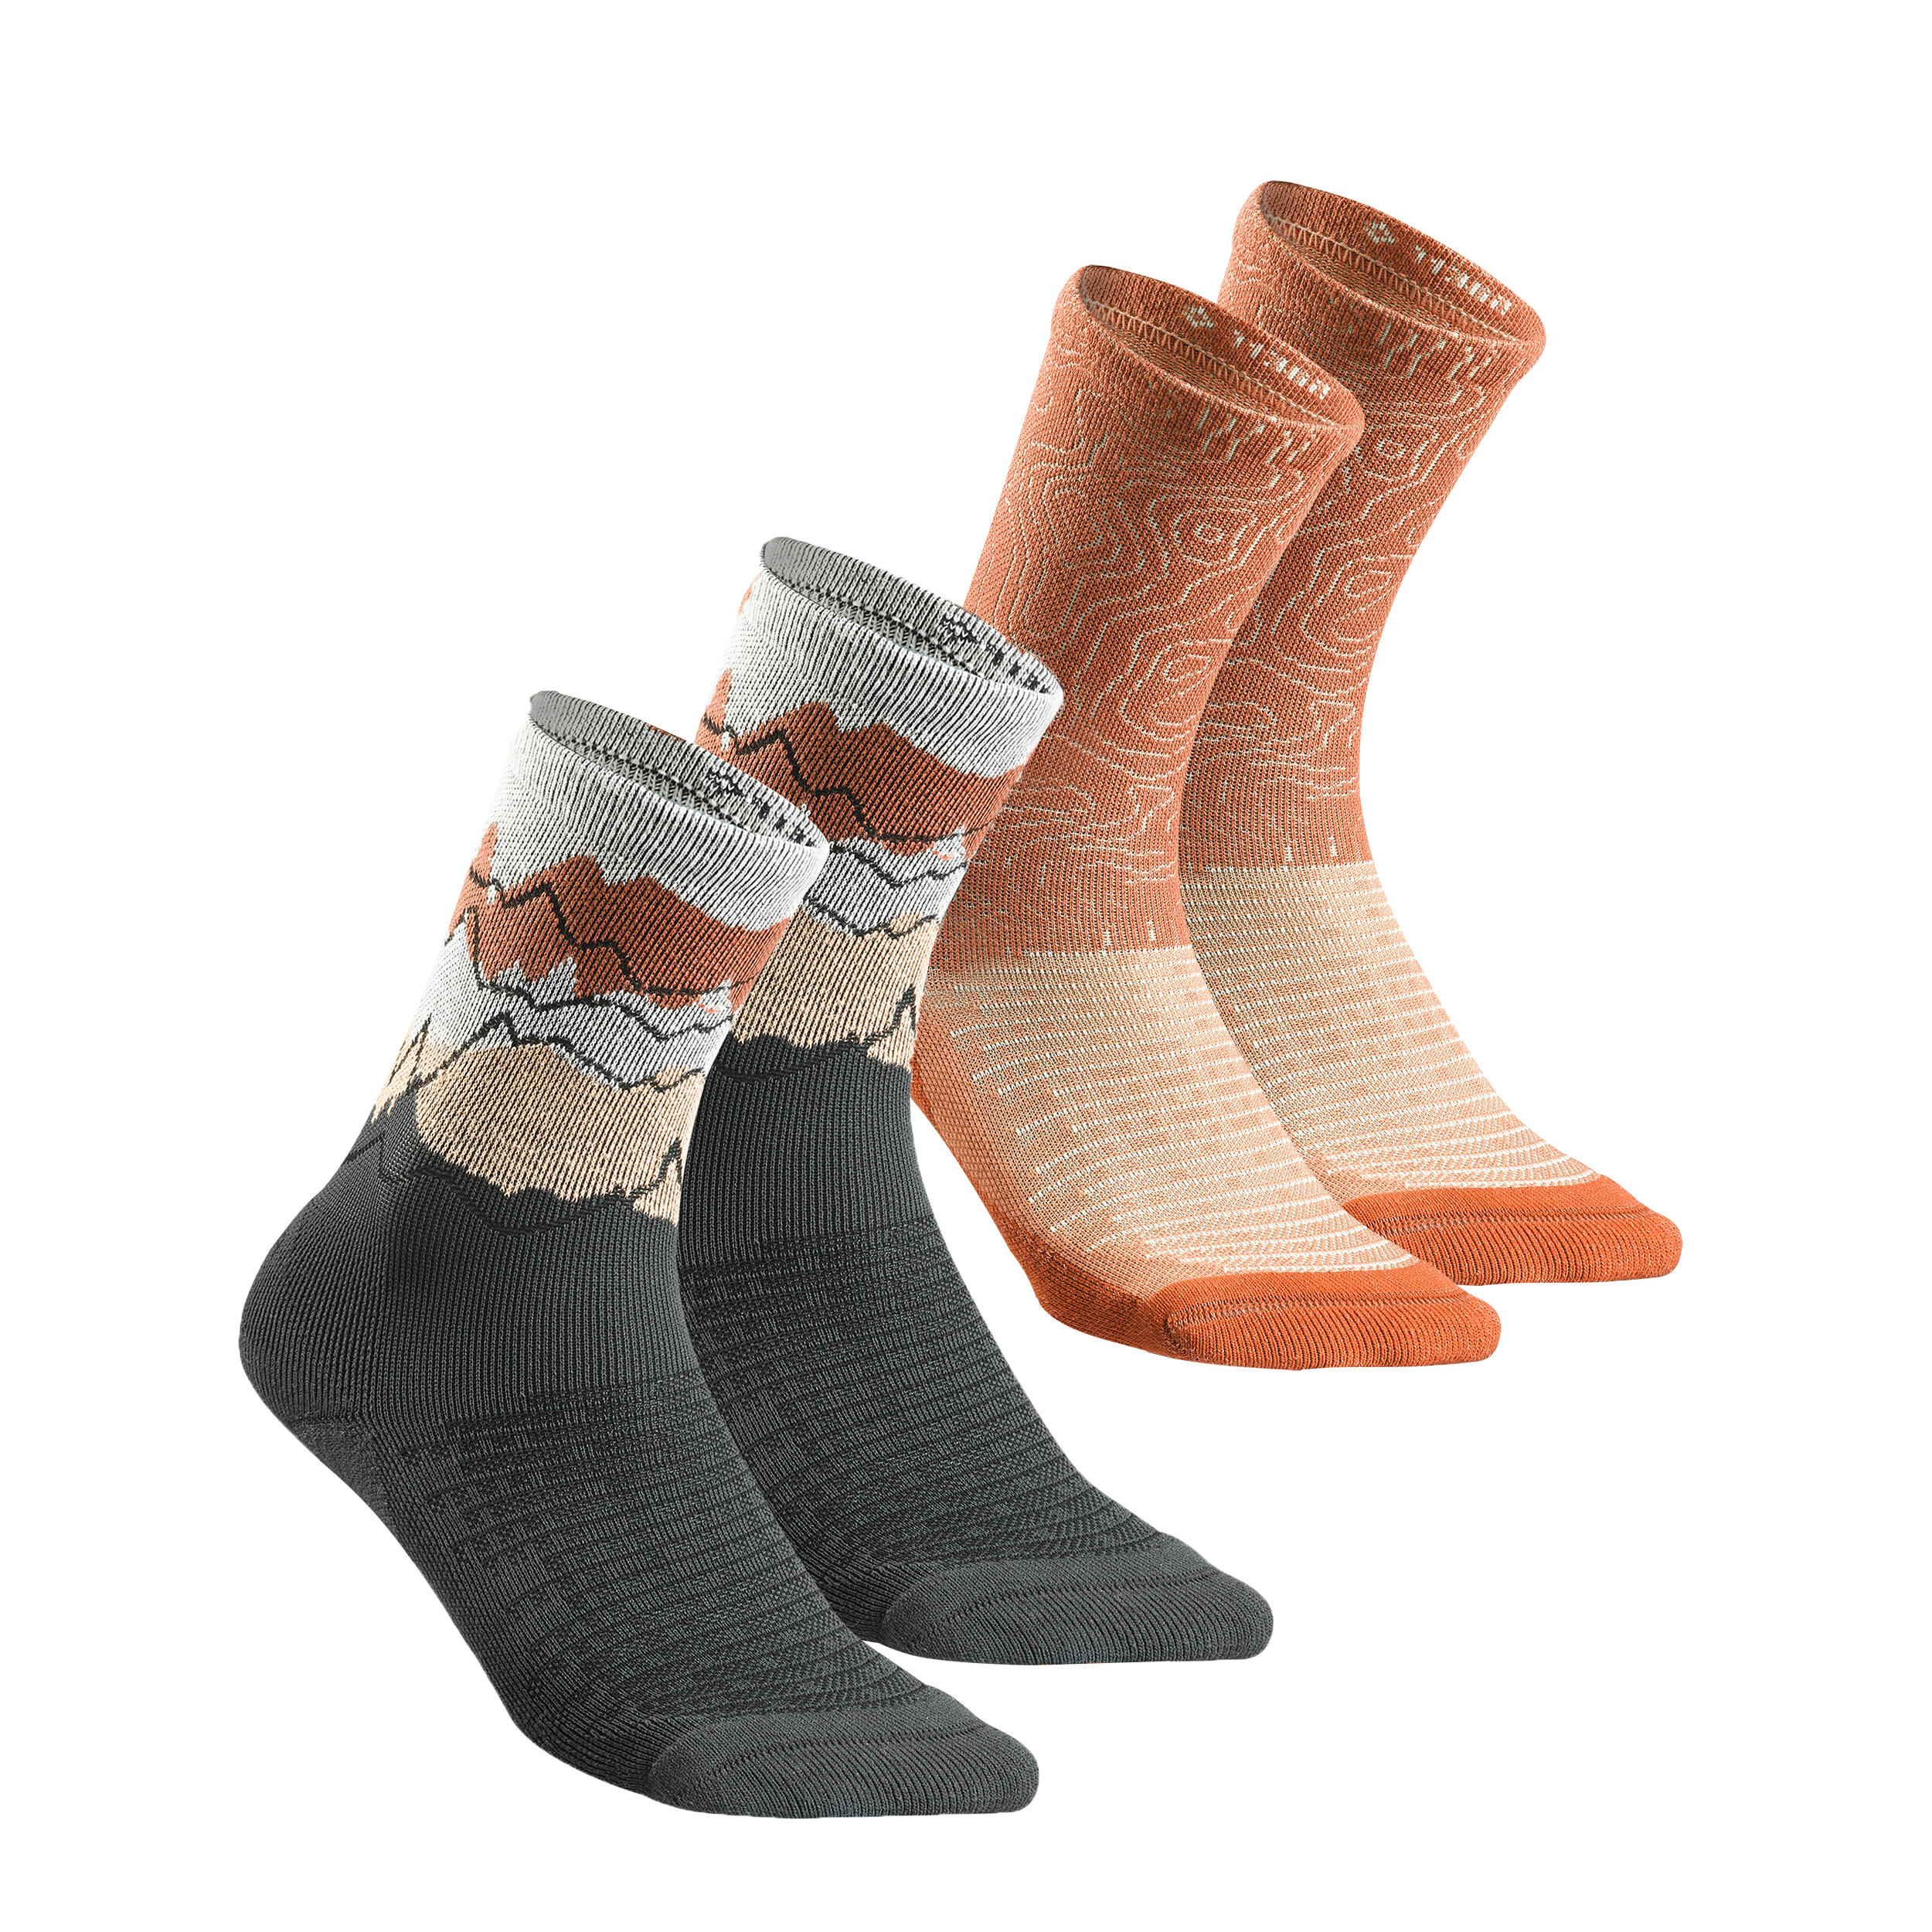 QUECHUA Sock Hike 100 High  - Limited Edition Pack of 2 Pairs - Terracotta